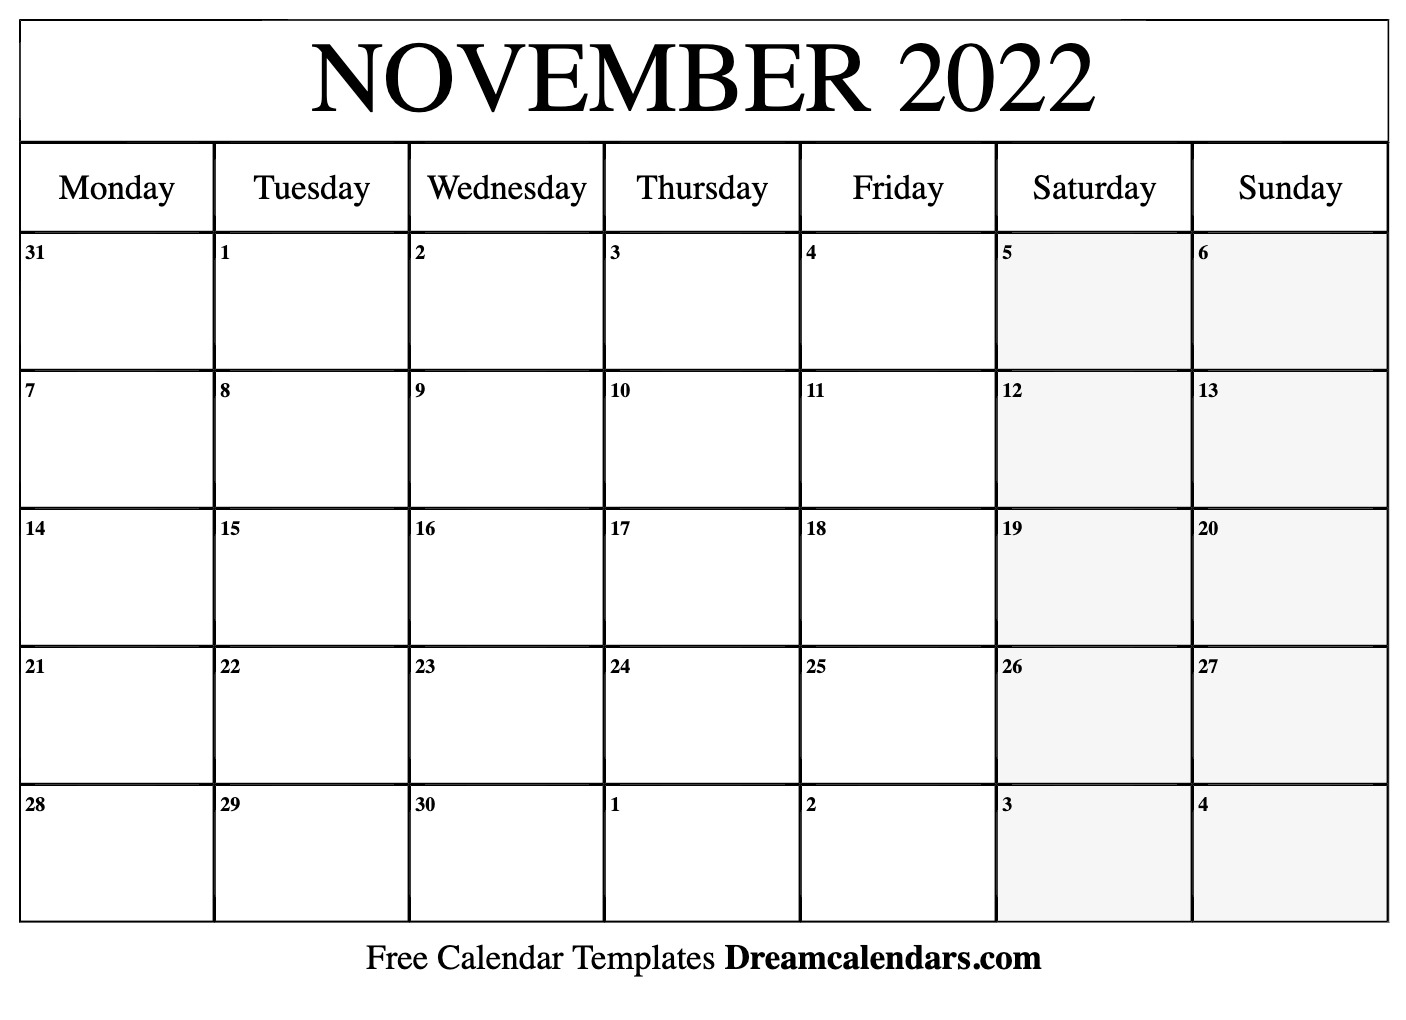 November 2022 Calendar - Free Printable with Holidays and Observances